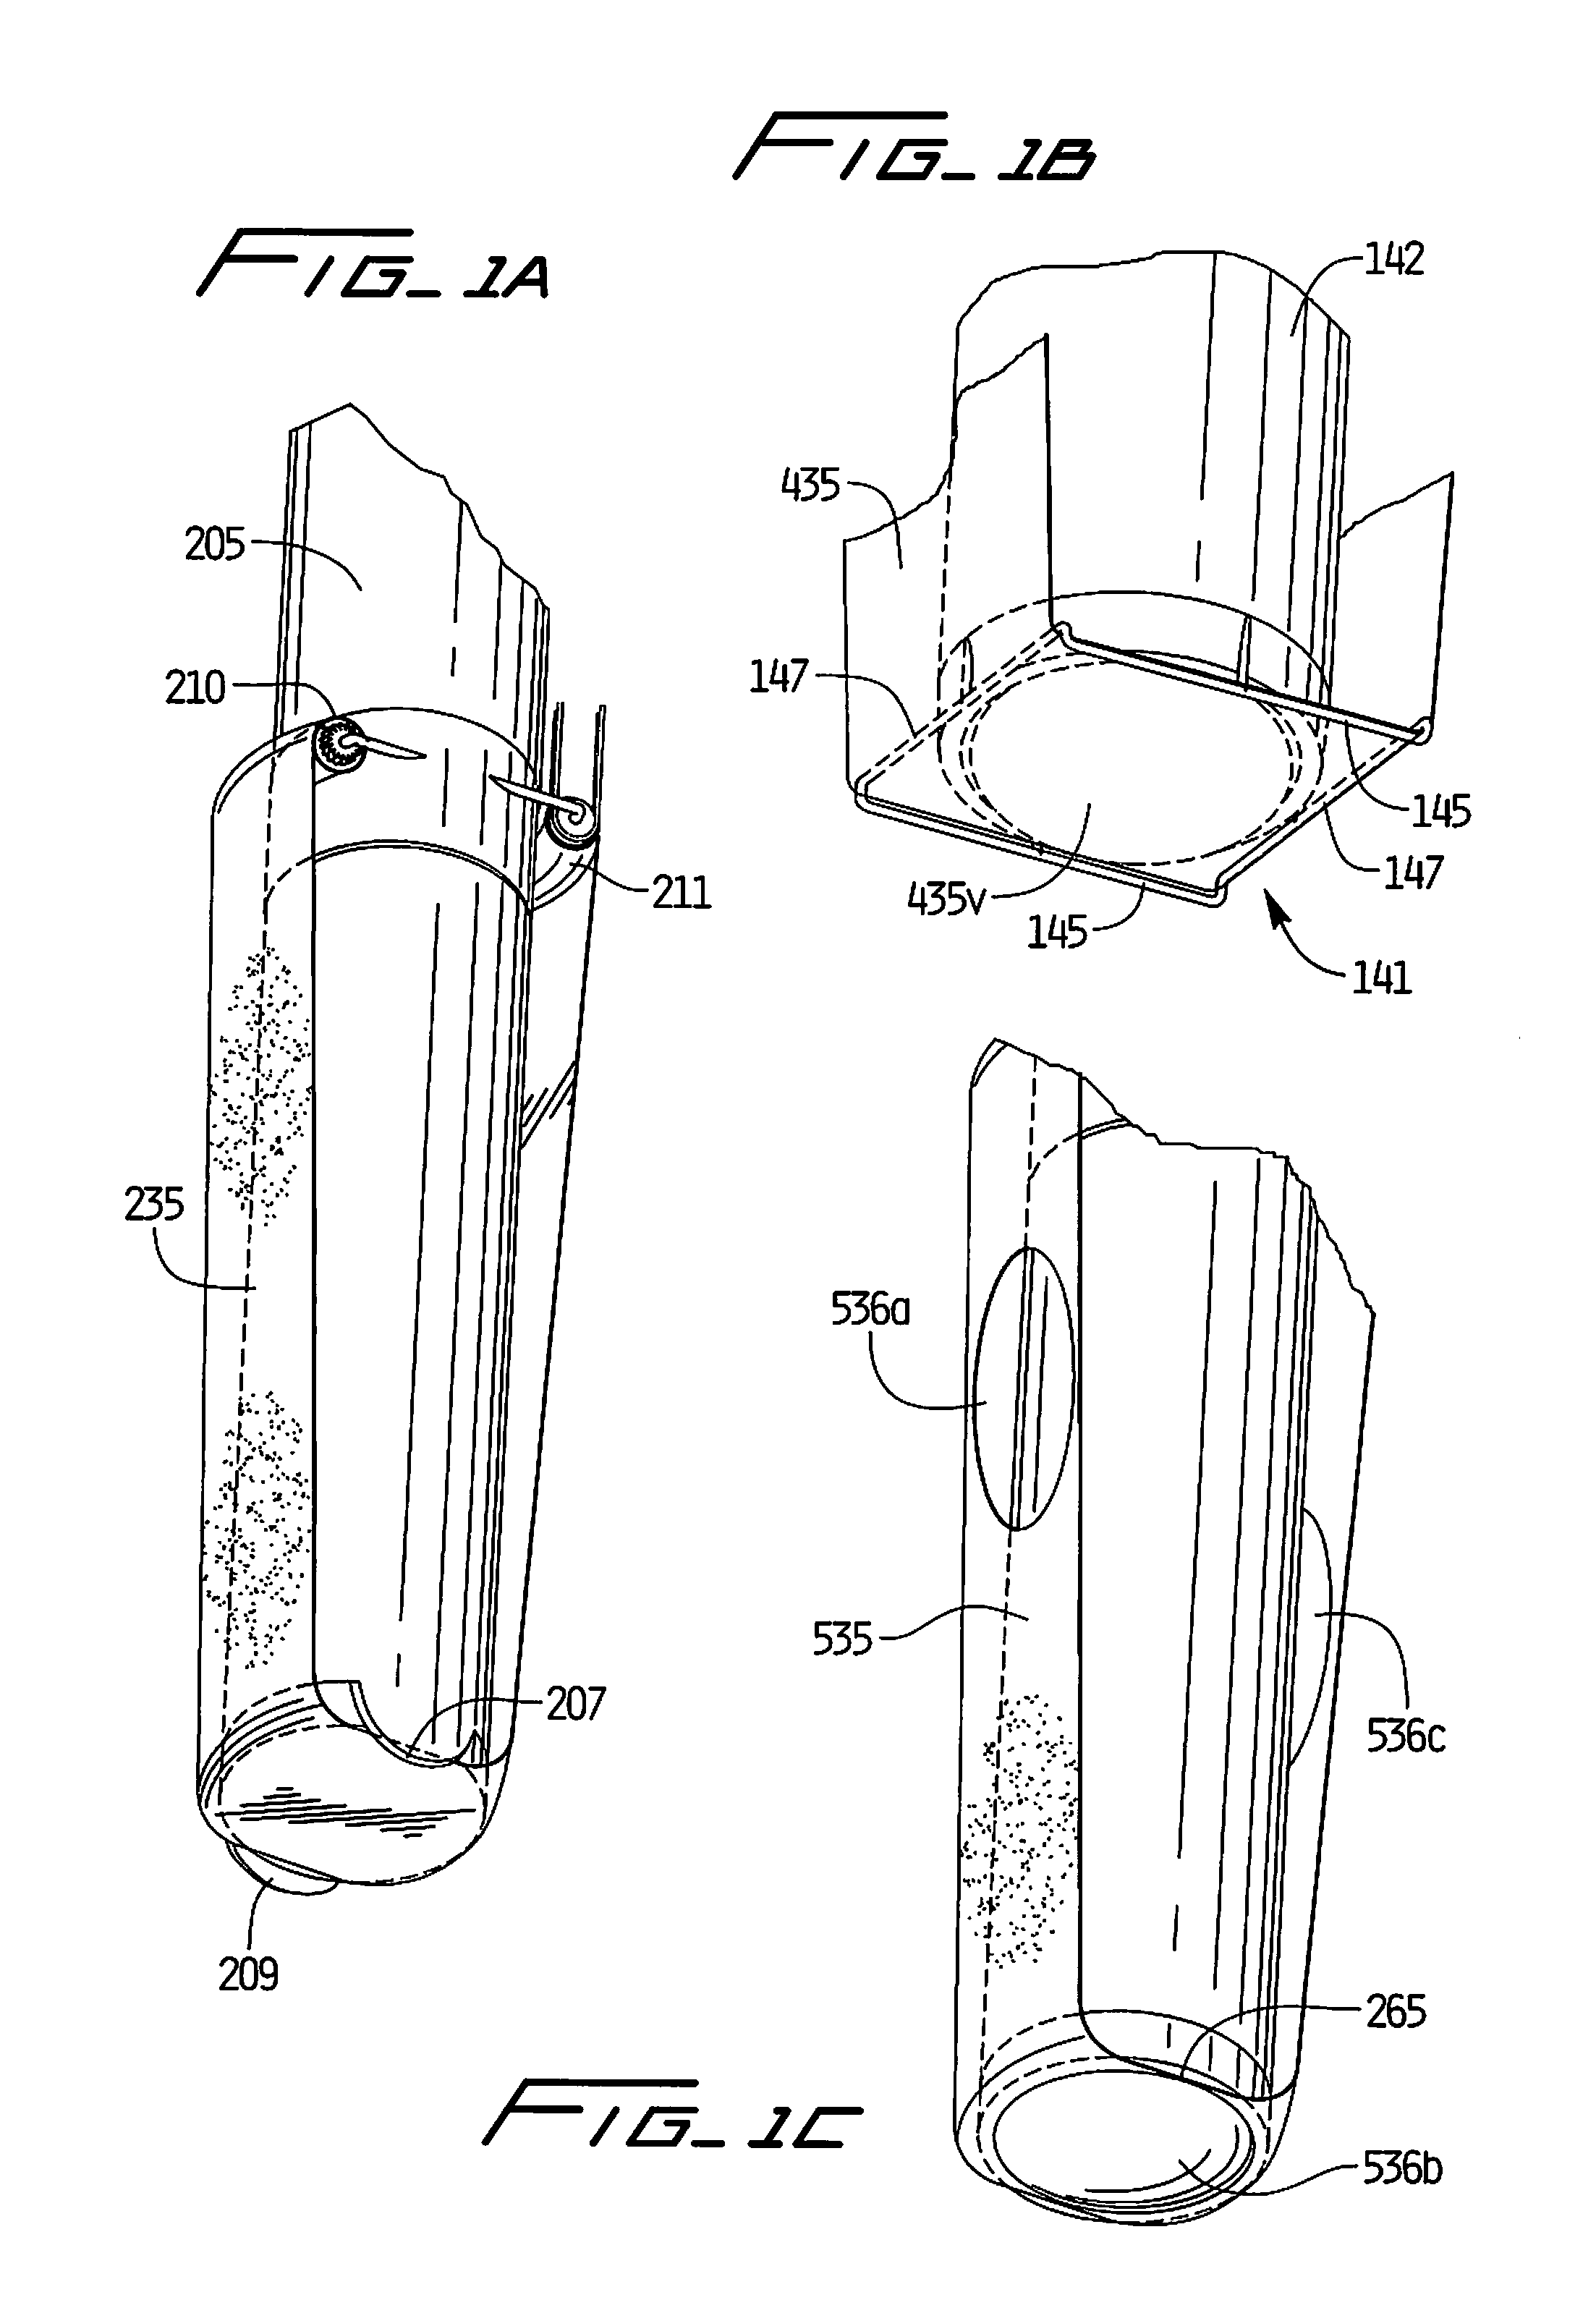 Covering Apparatus For An Endoscope Lens